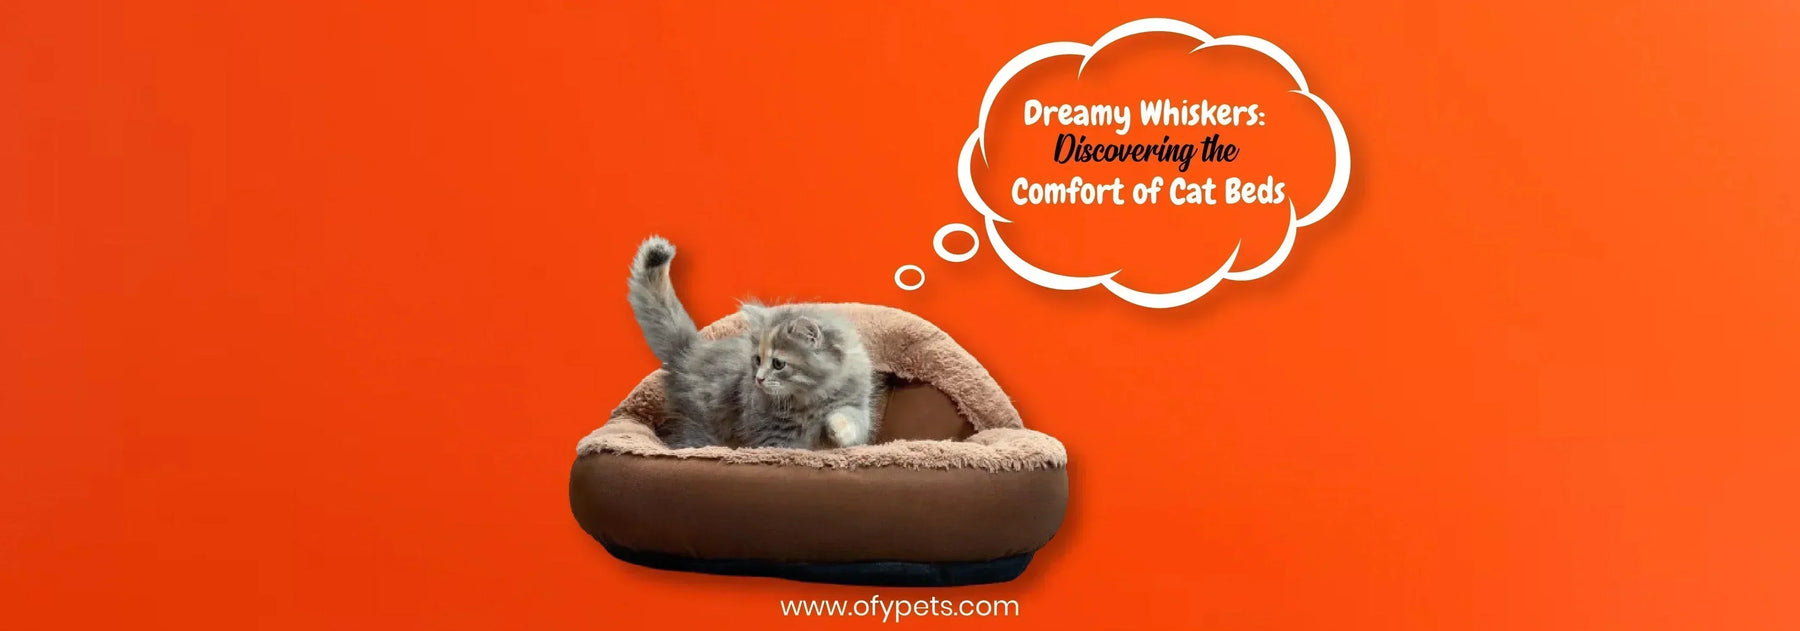 Dreamy Whiskers: Discovering the Comfort of Cat Beds - Ofypets